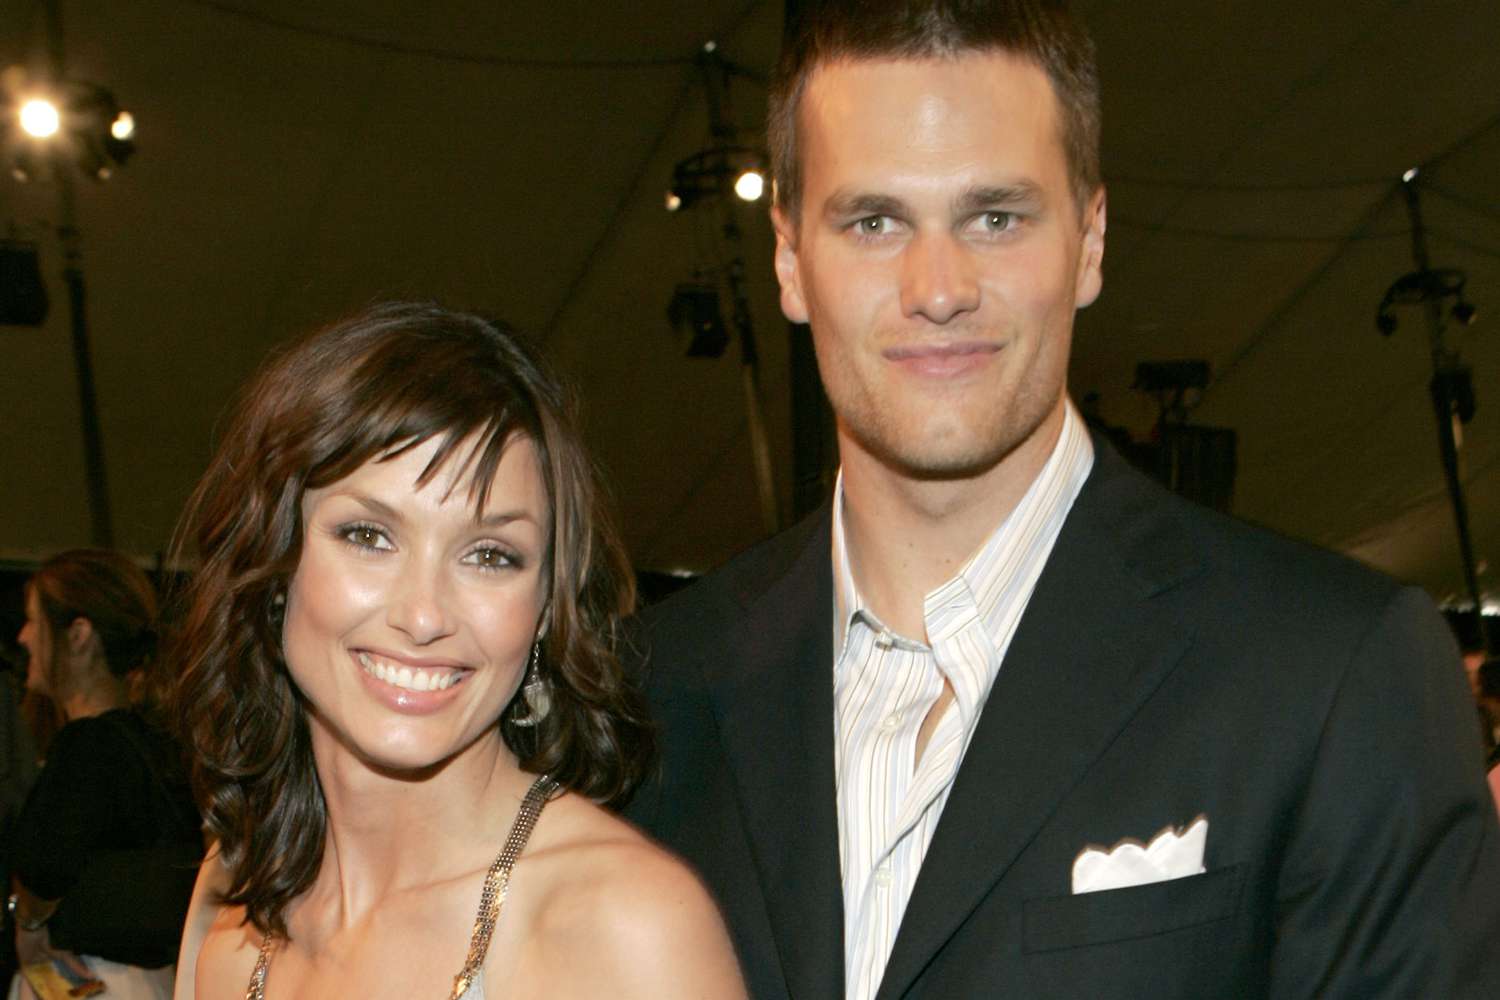 After Tom Brady Is Trolled for Abandoning Her in the Middle of Her Pregnancy, Bridget Moynahan Throws a Jab via Post